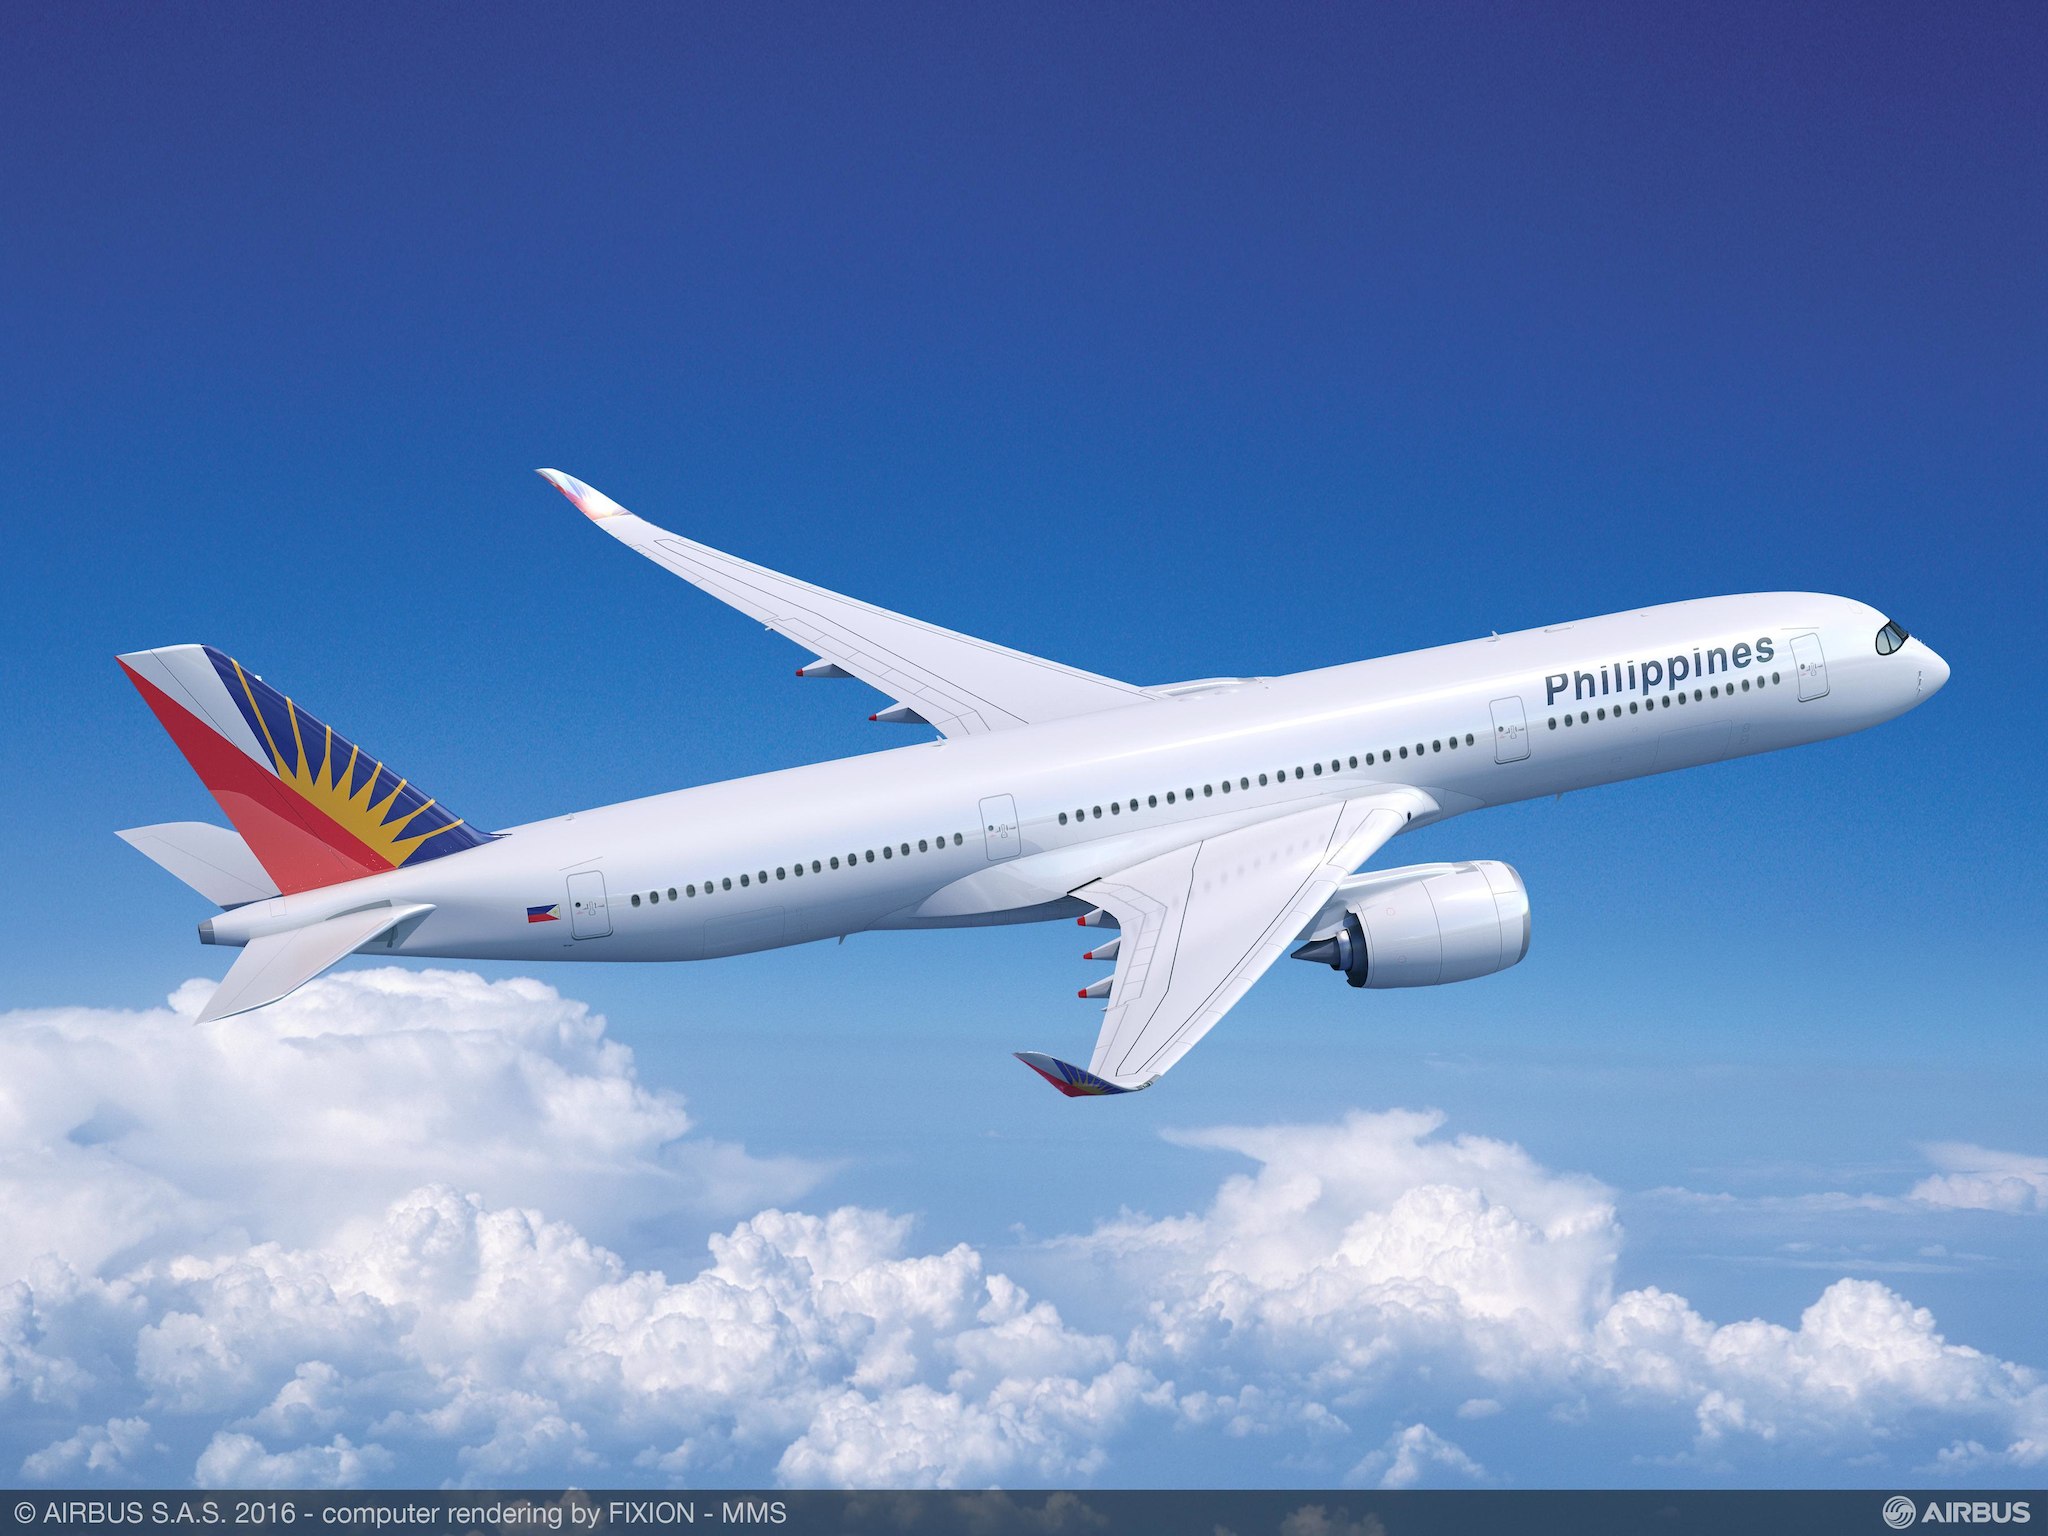 Philippine Airlines A350-900 - Airbus